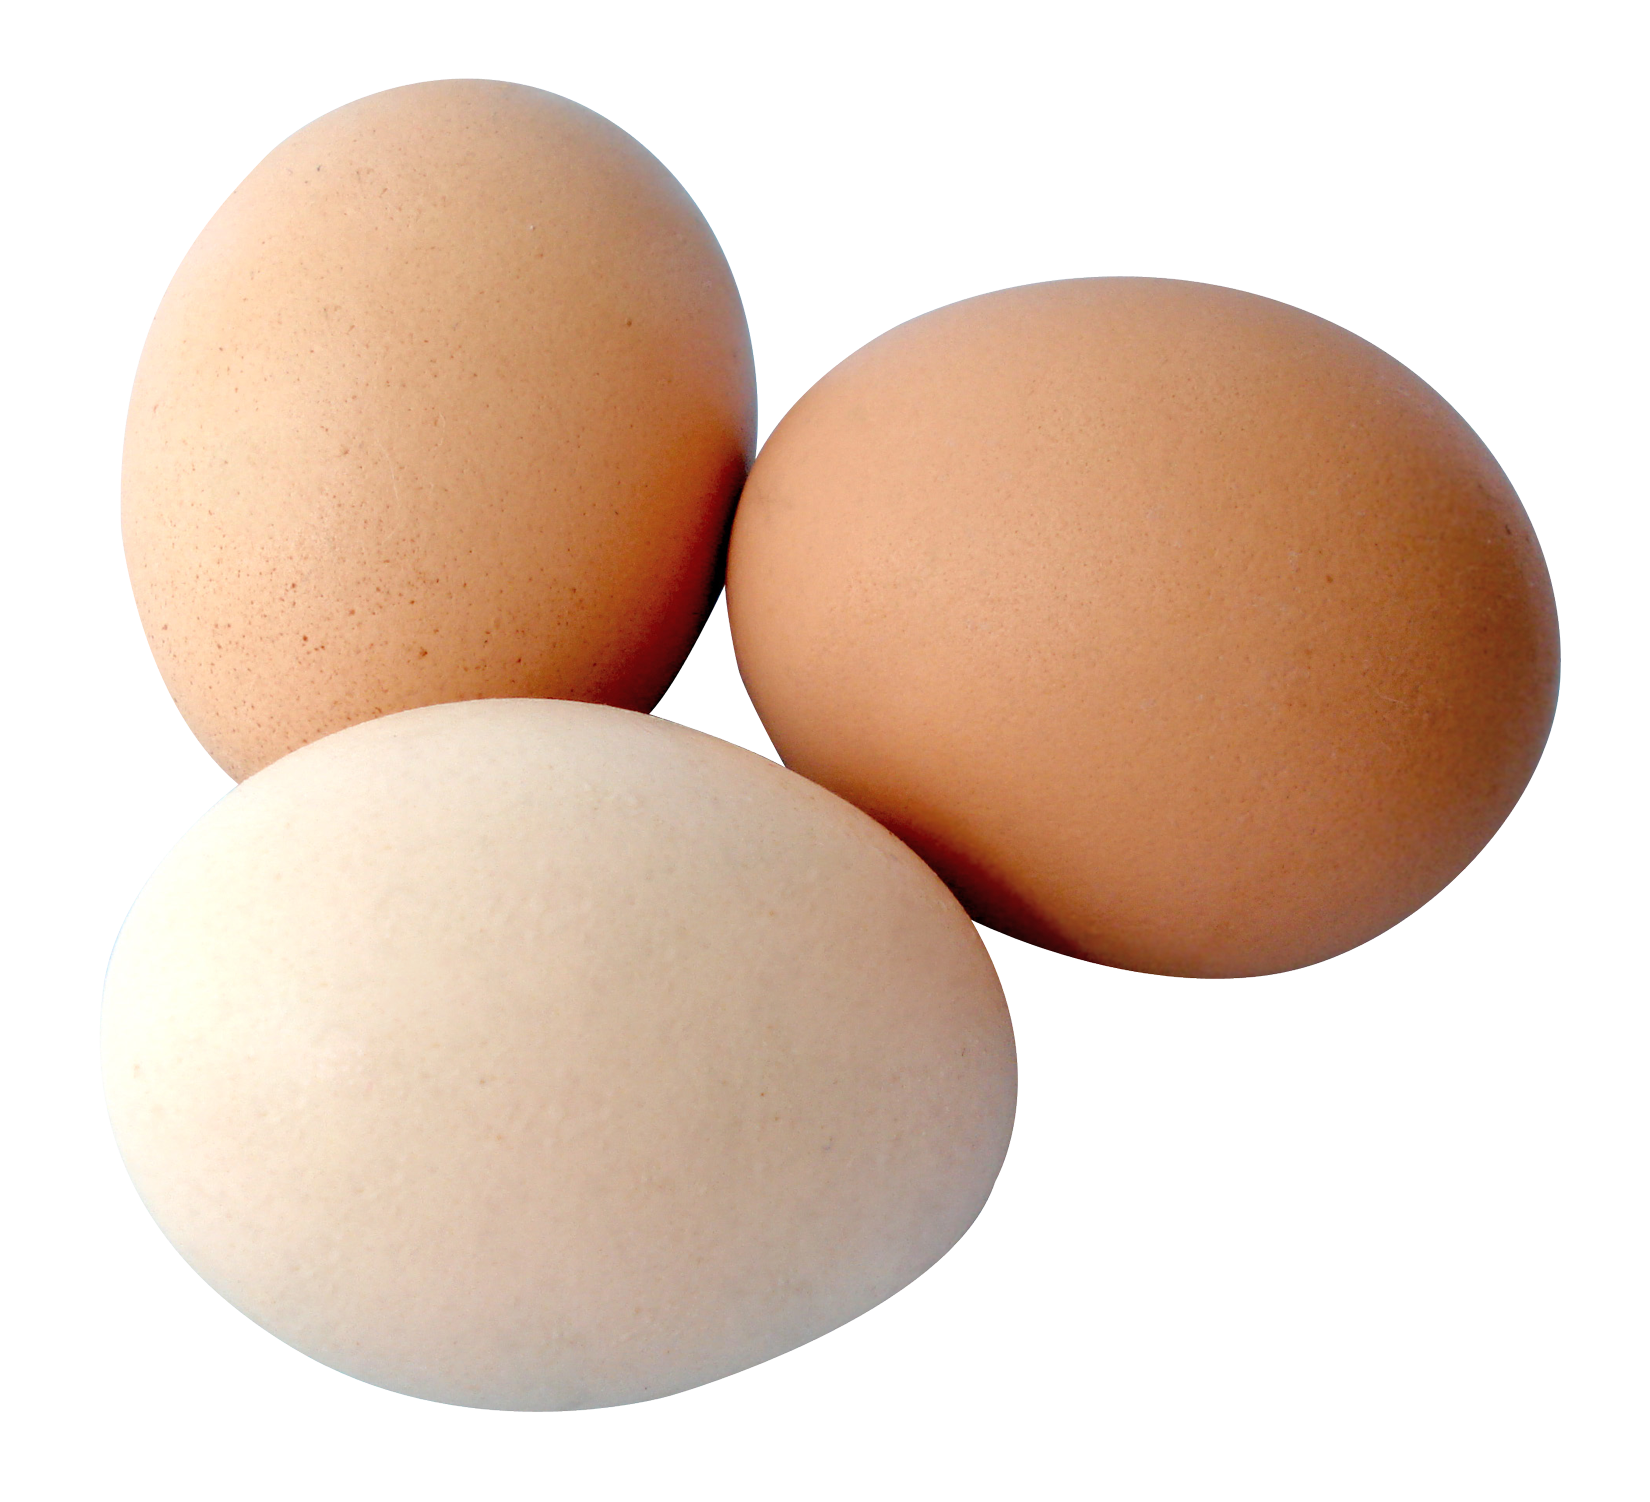 A Group Of Eggs On A Black Background